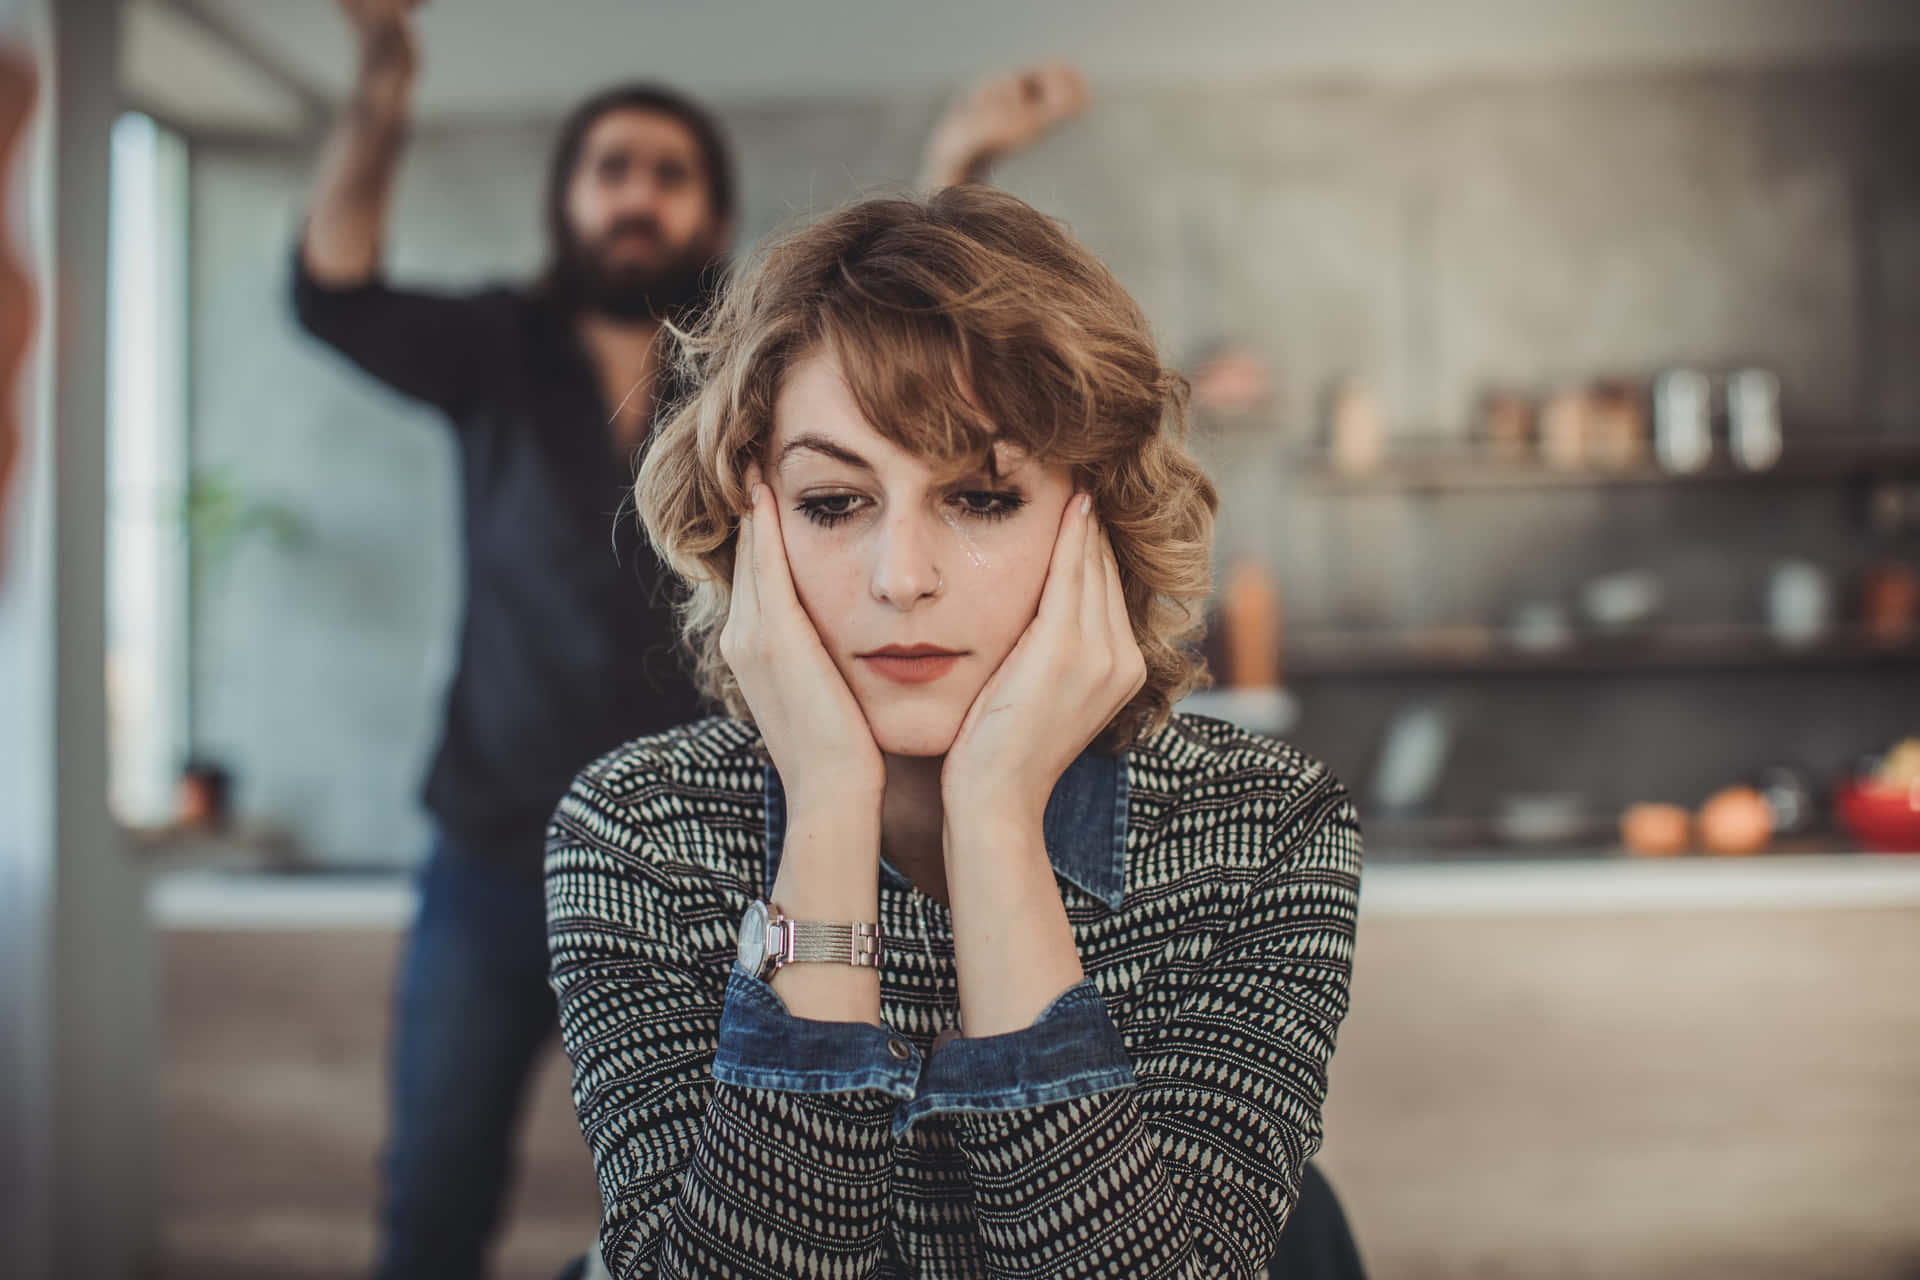 Woman In The Kitchen With Man In The Background Toxic Relationship Background